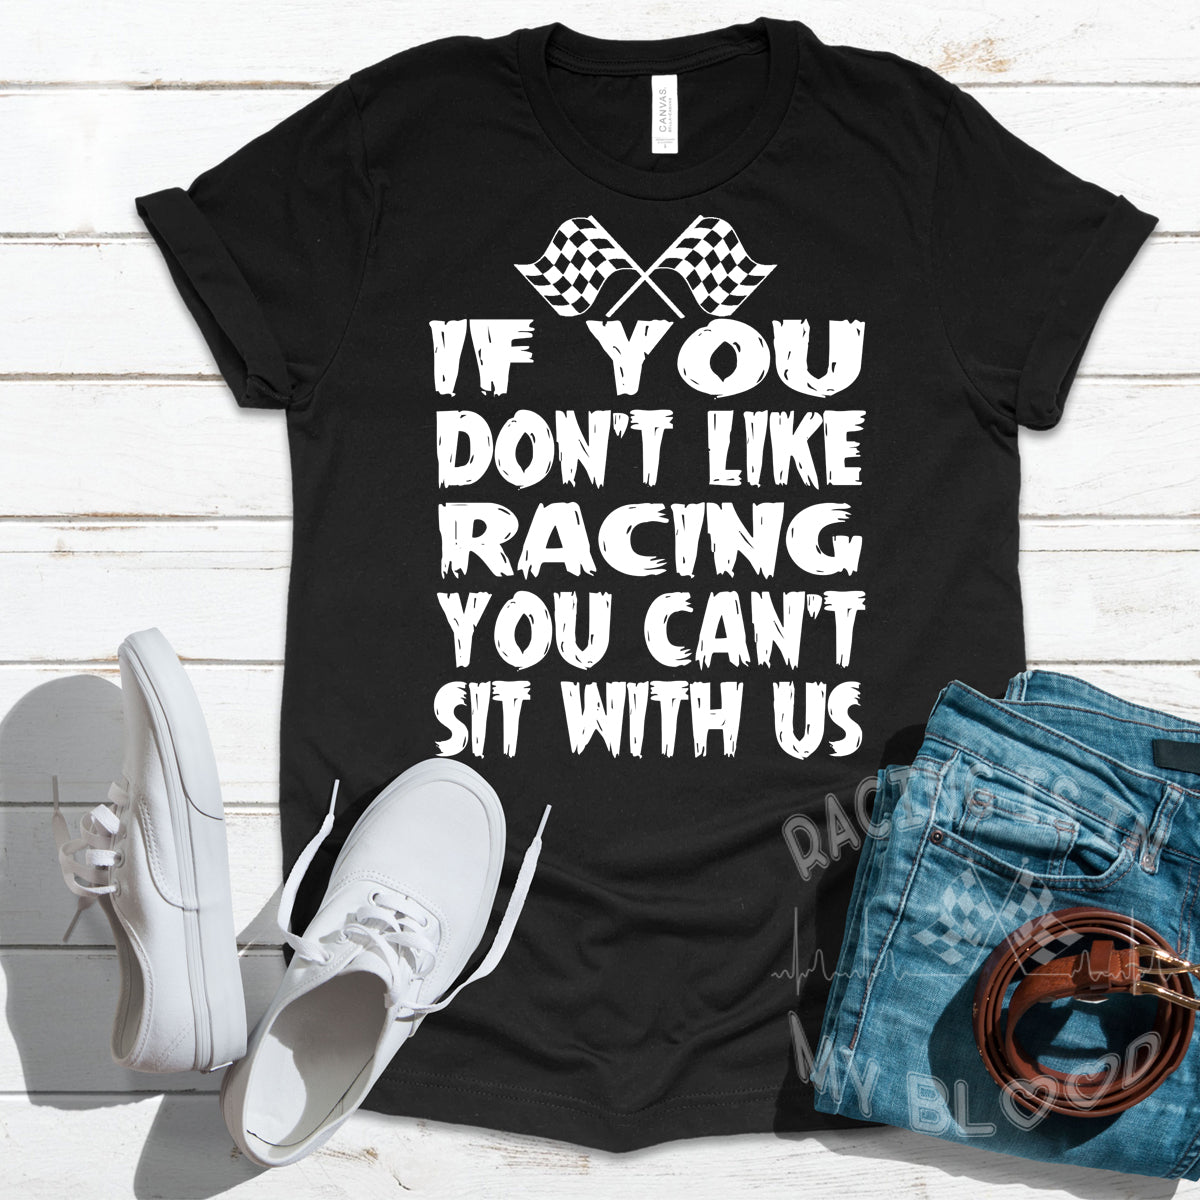 If You Don't Like Racing Don't Sit With Us T-Shirts!